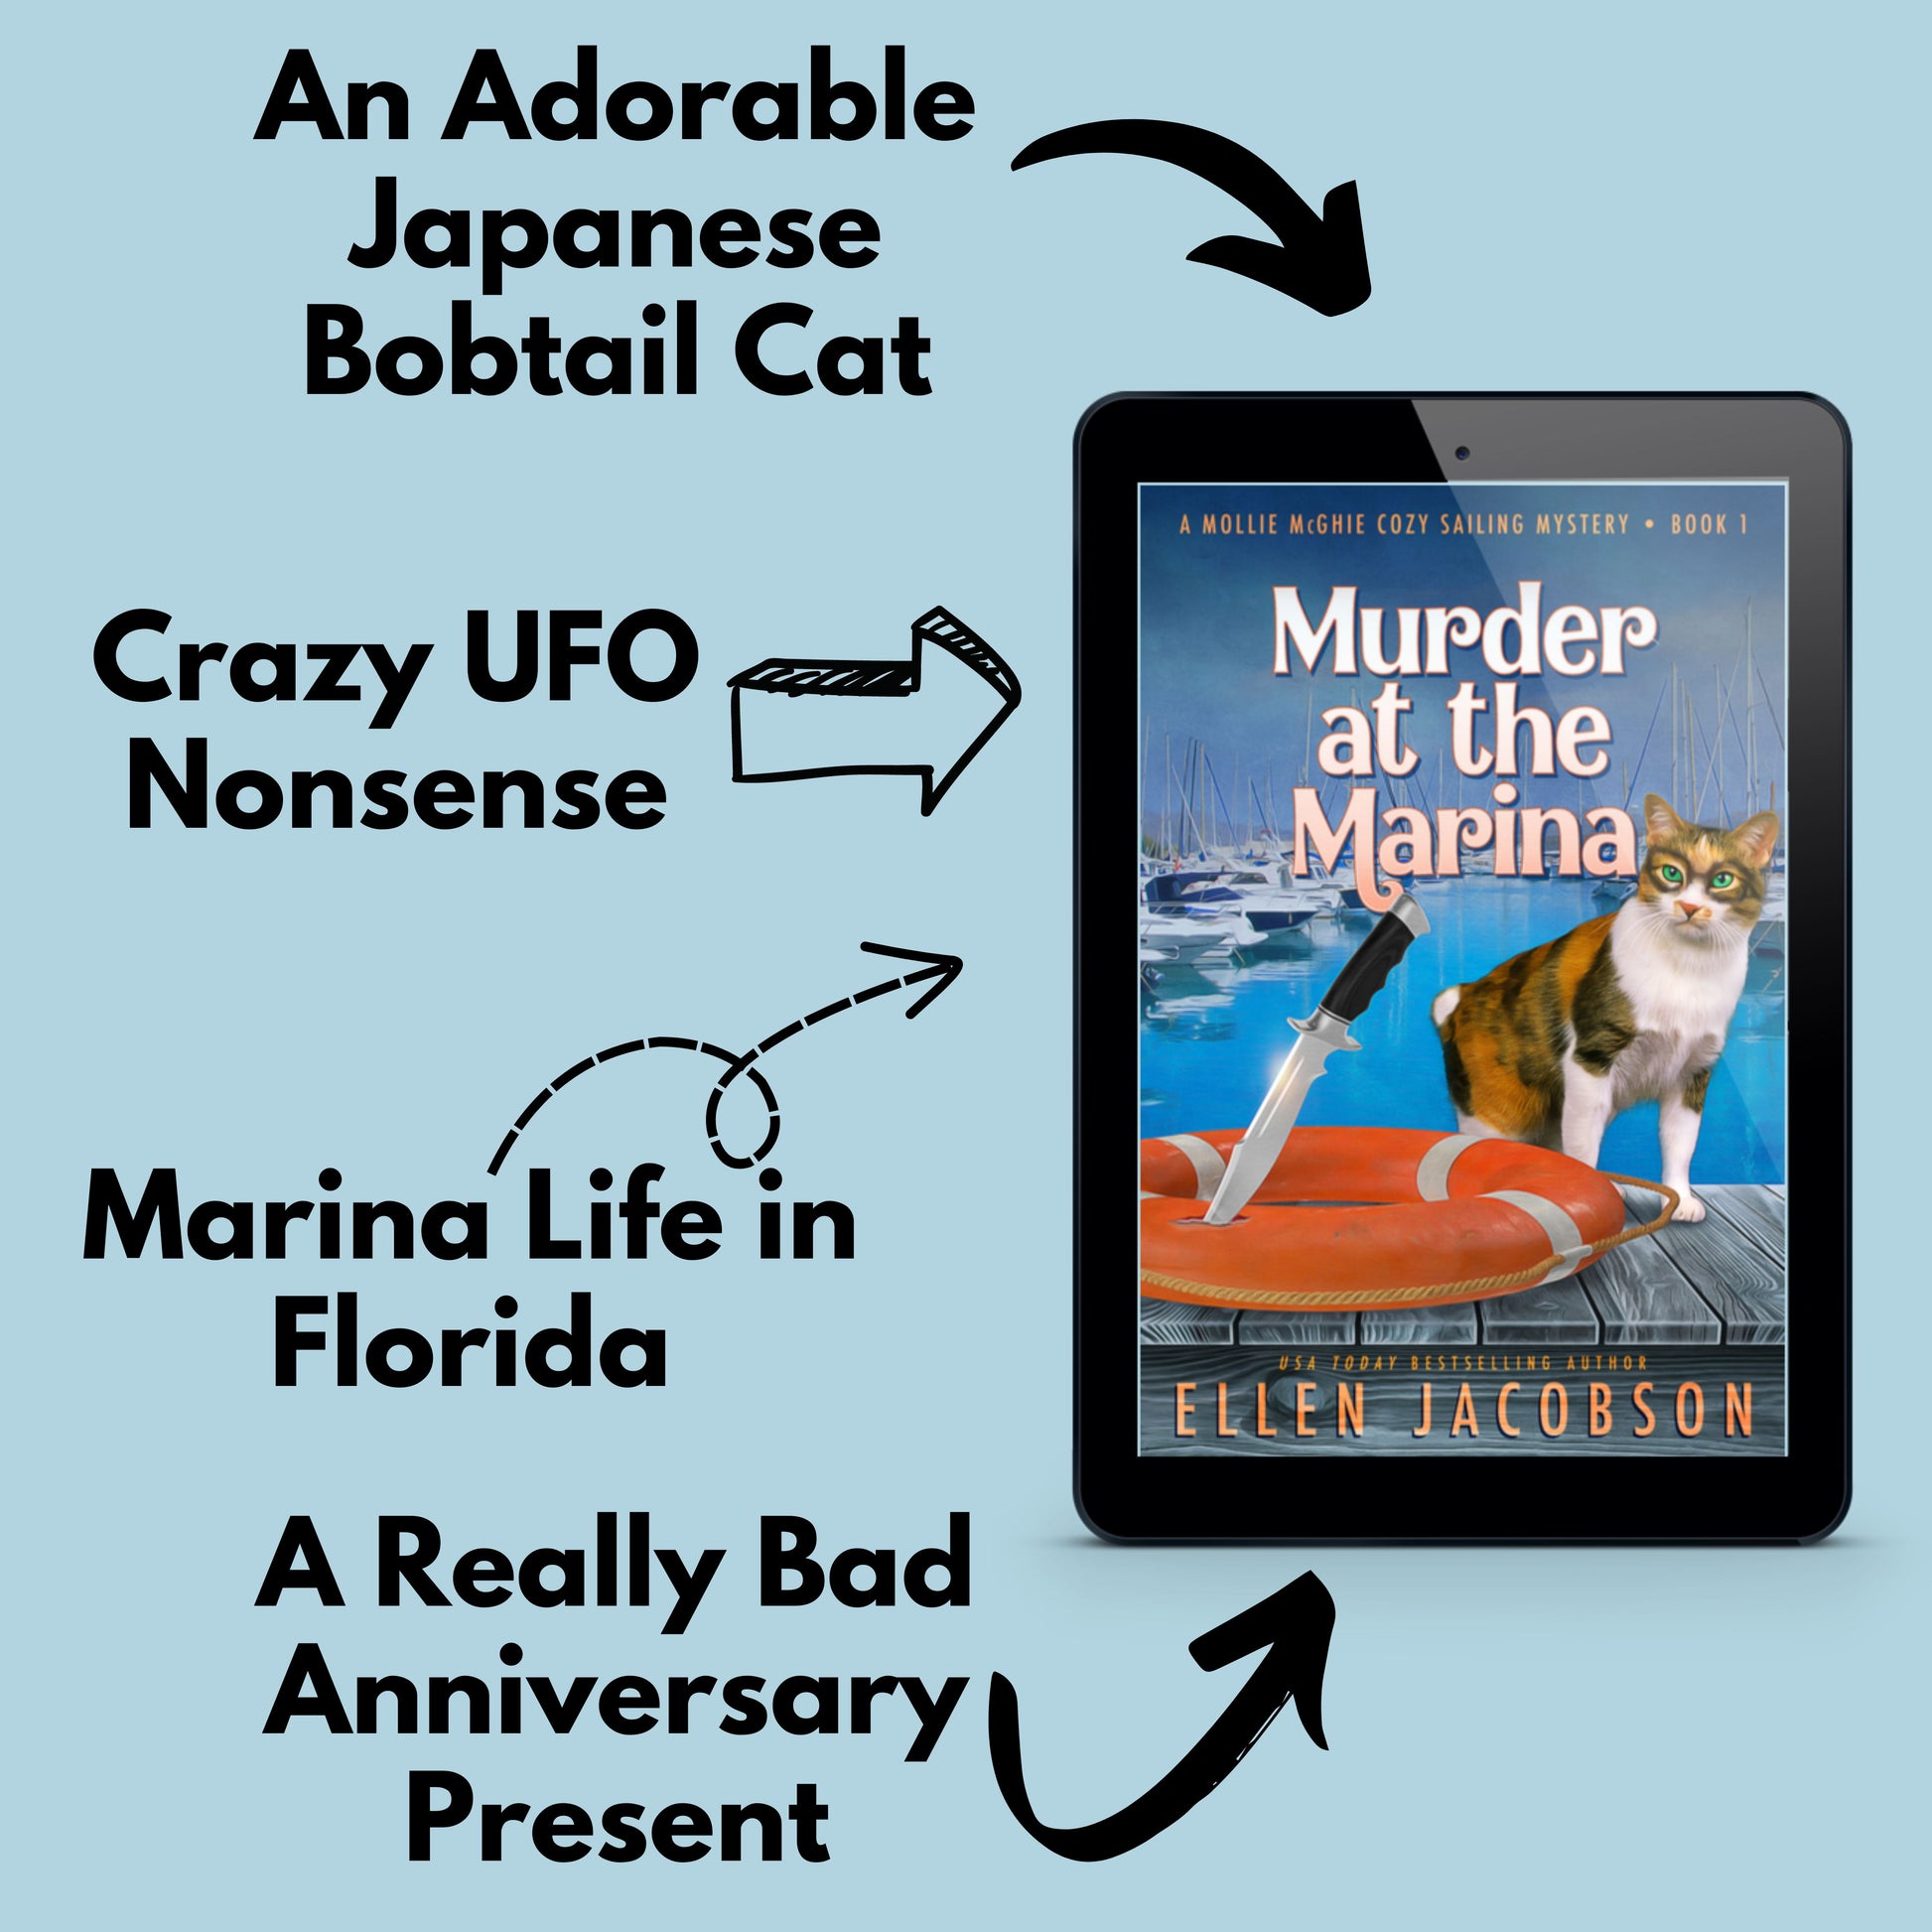 Image of ebook of Murder at the Marina (book #1 in the Mollie McGhie cozy mstery series) by Ellen Jacobson